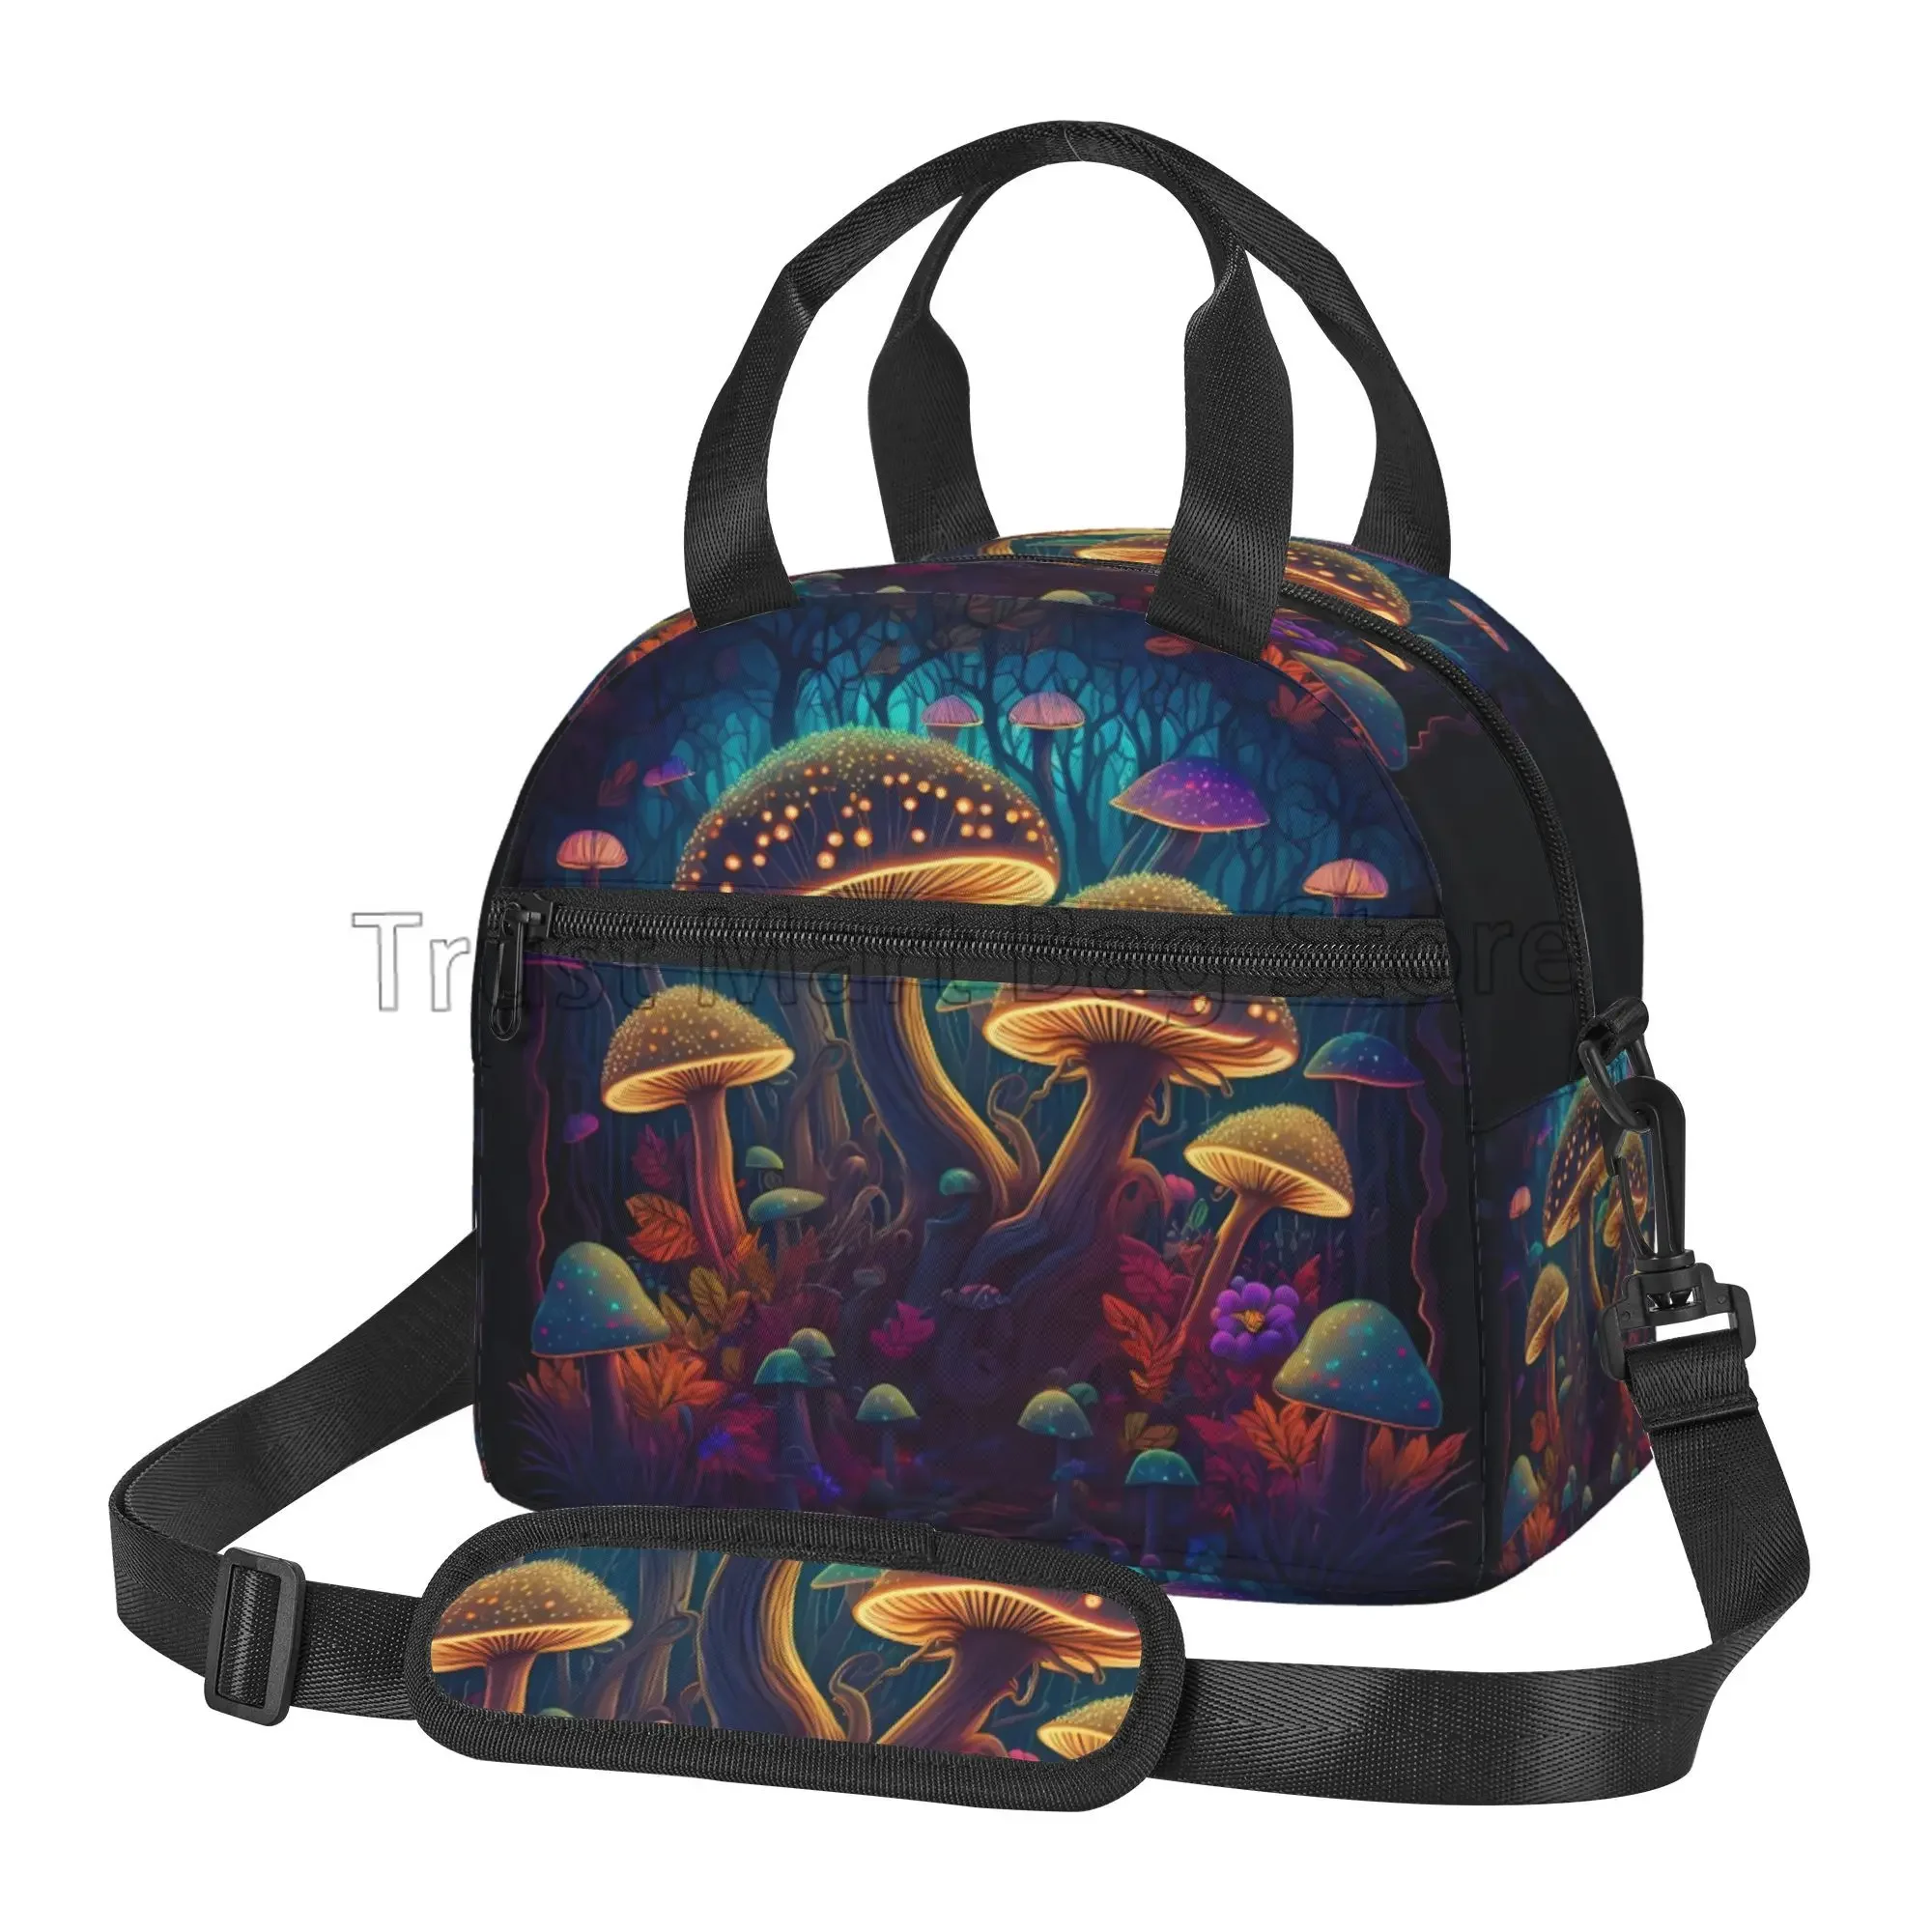 

Forest Colorful Mushrooms Insulated Lunch Bag Reusable Waterproof Thermal Lunch Box with Shoulder Strap for Work Picnic Beach